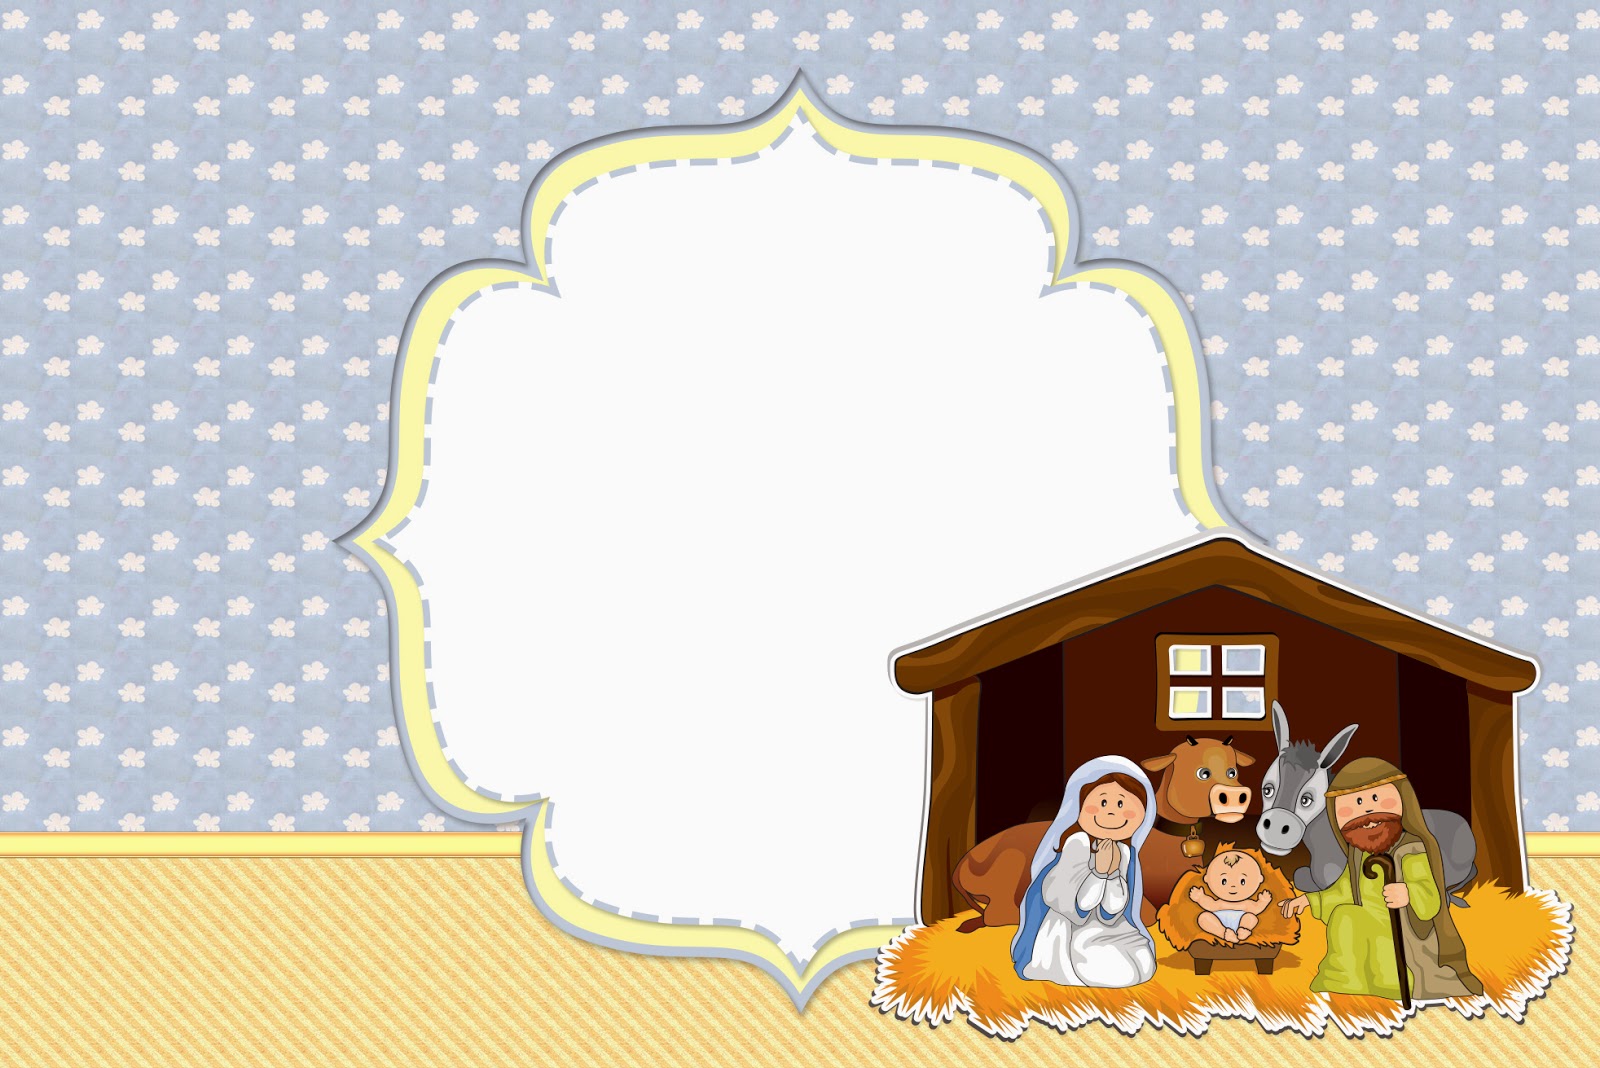 sweet-nativity-scene-free-printable-invitations-or-cards-oh-my